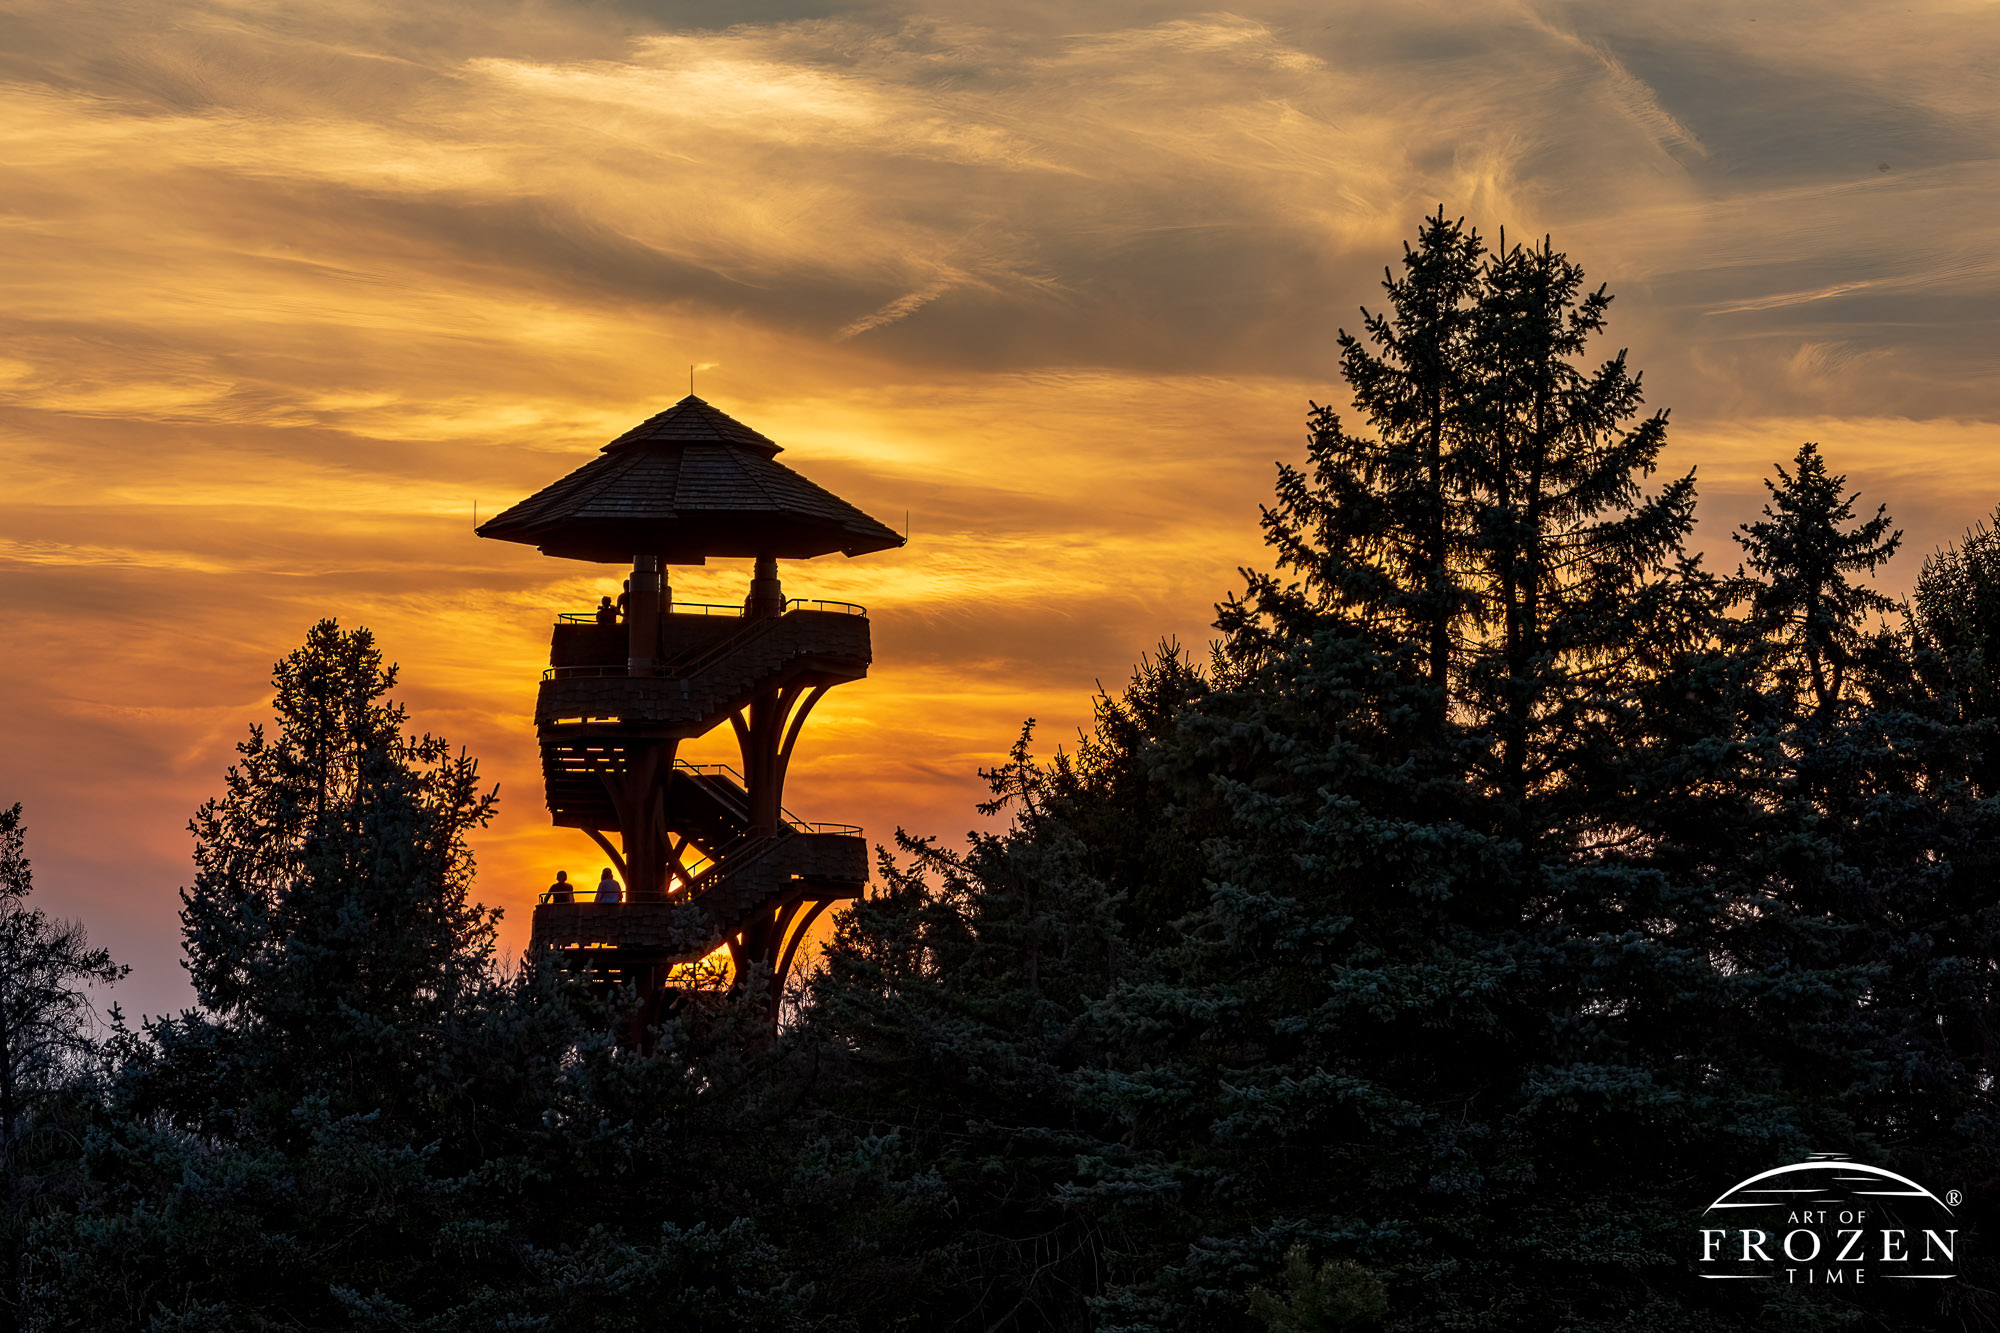 A sunset silhouette of the Cox Arboretum MetroPark Tree Tower as high cirrus clouds filter the warm light